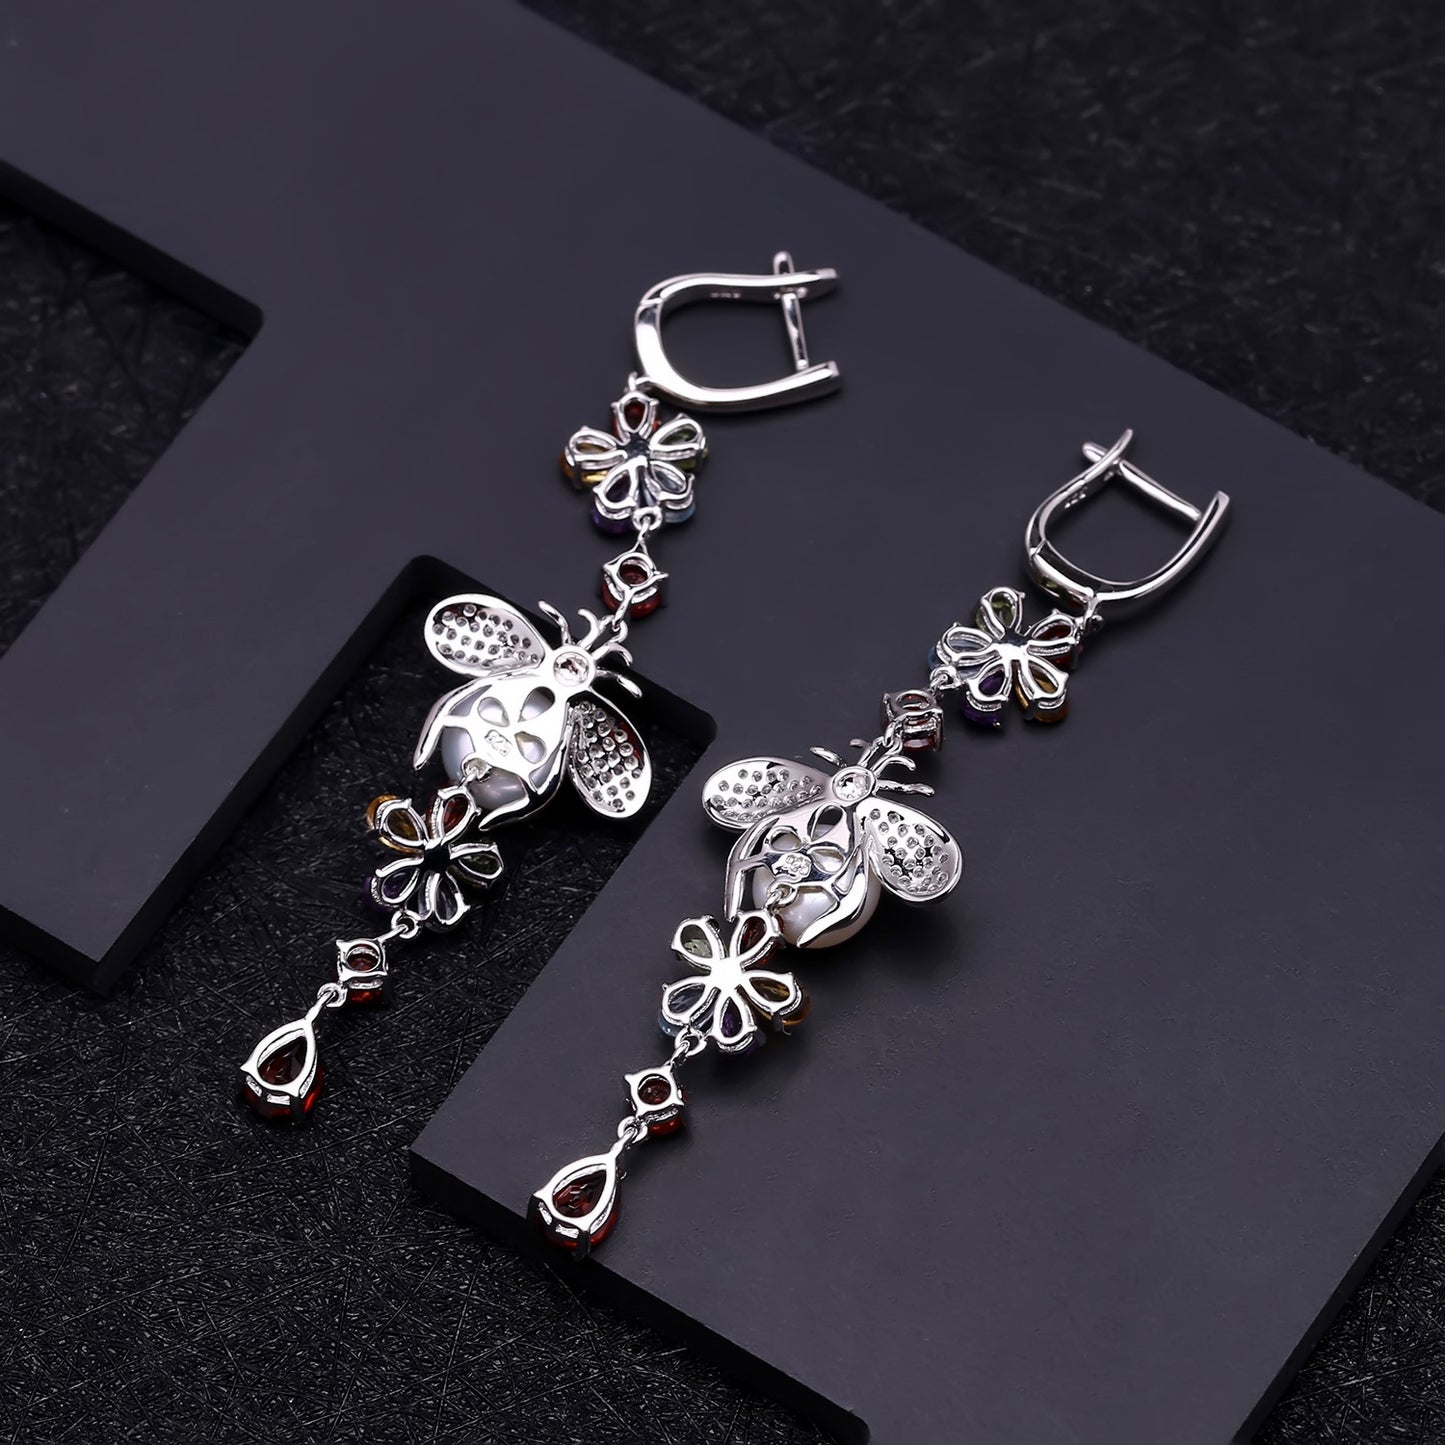 European Gemstones with Pearl Bee and Flower Design Silver Drop Earrings for Women